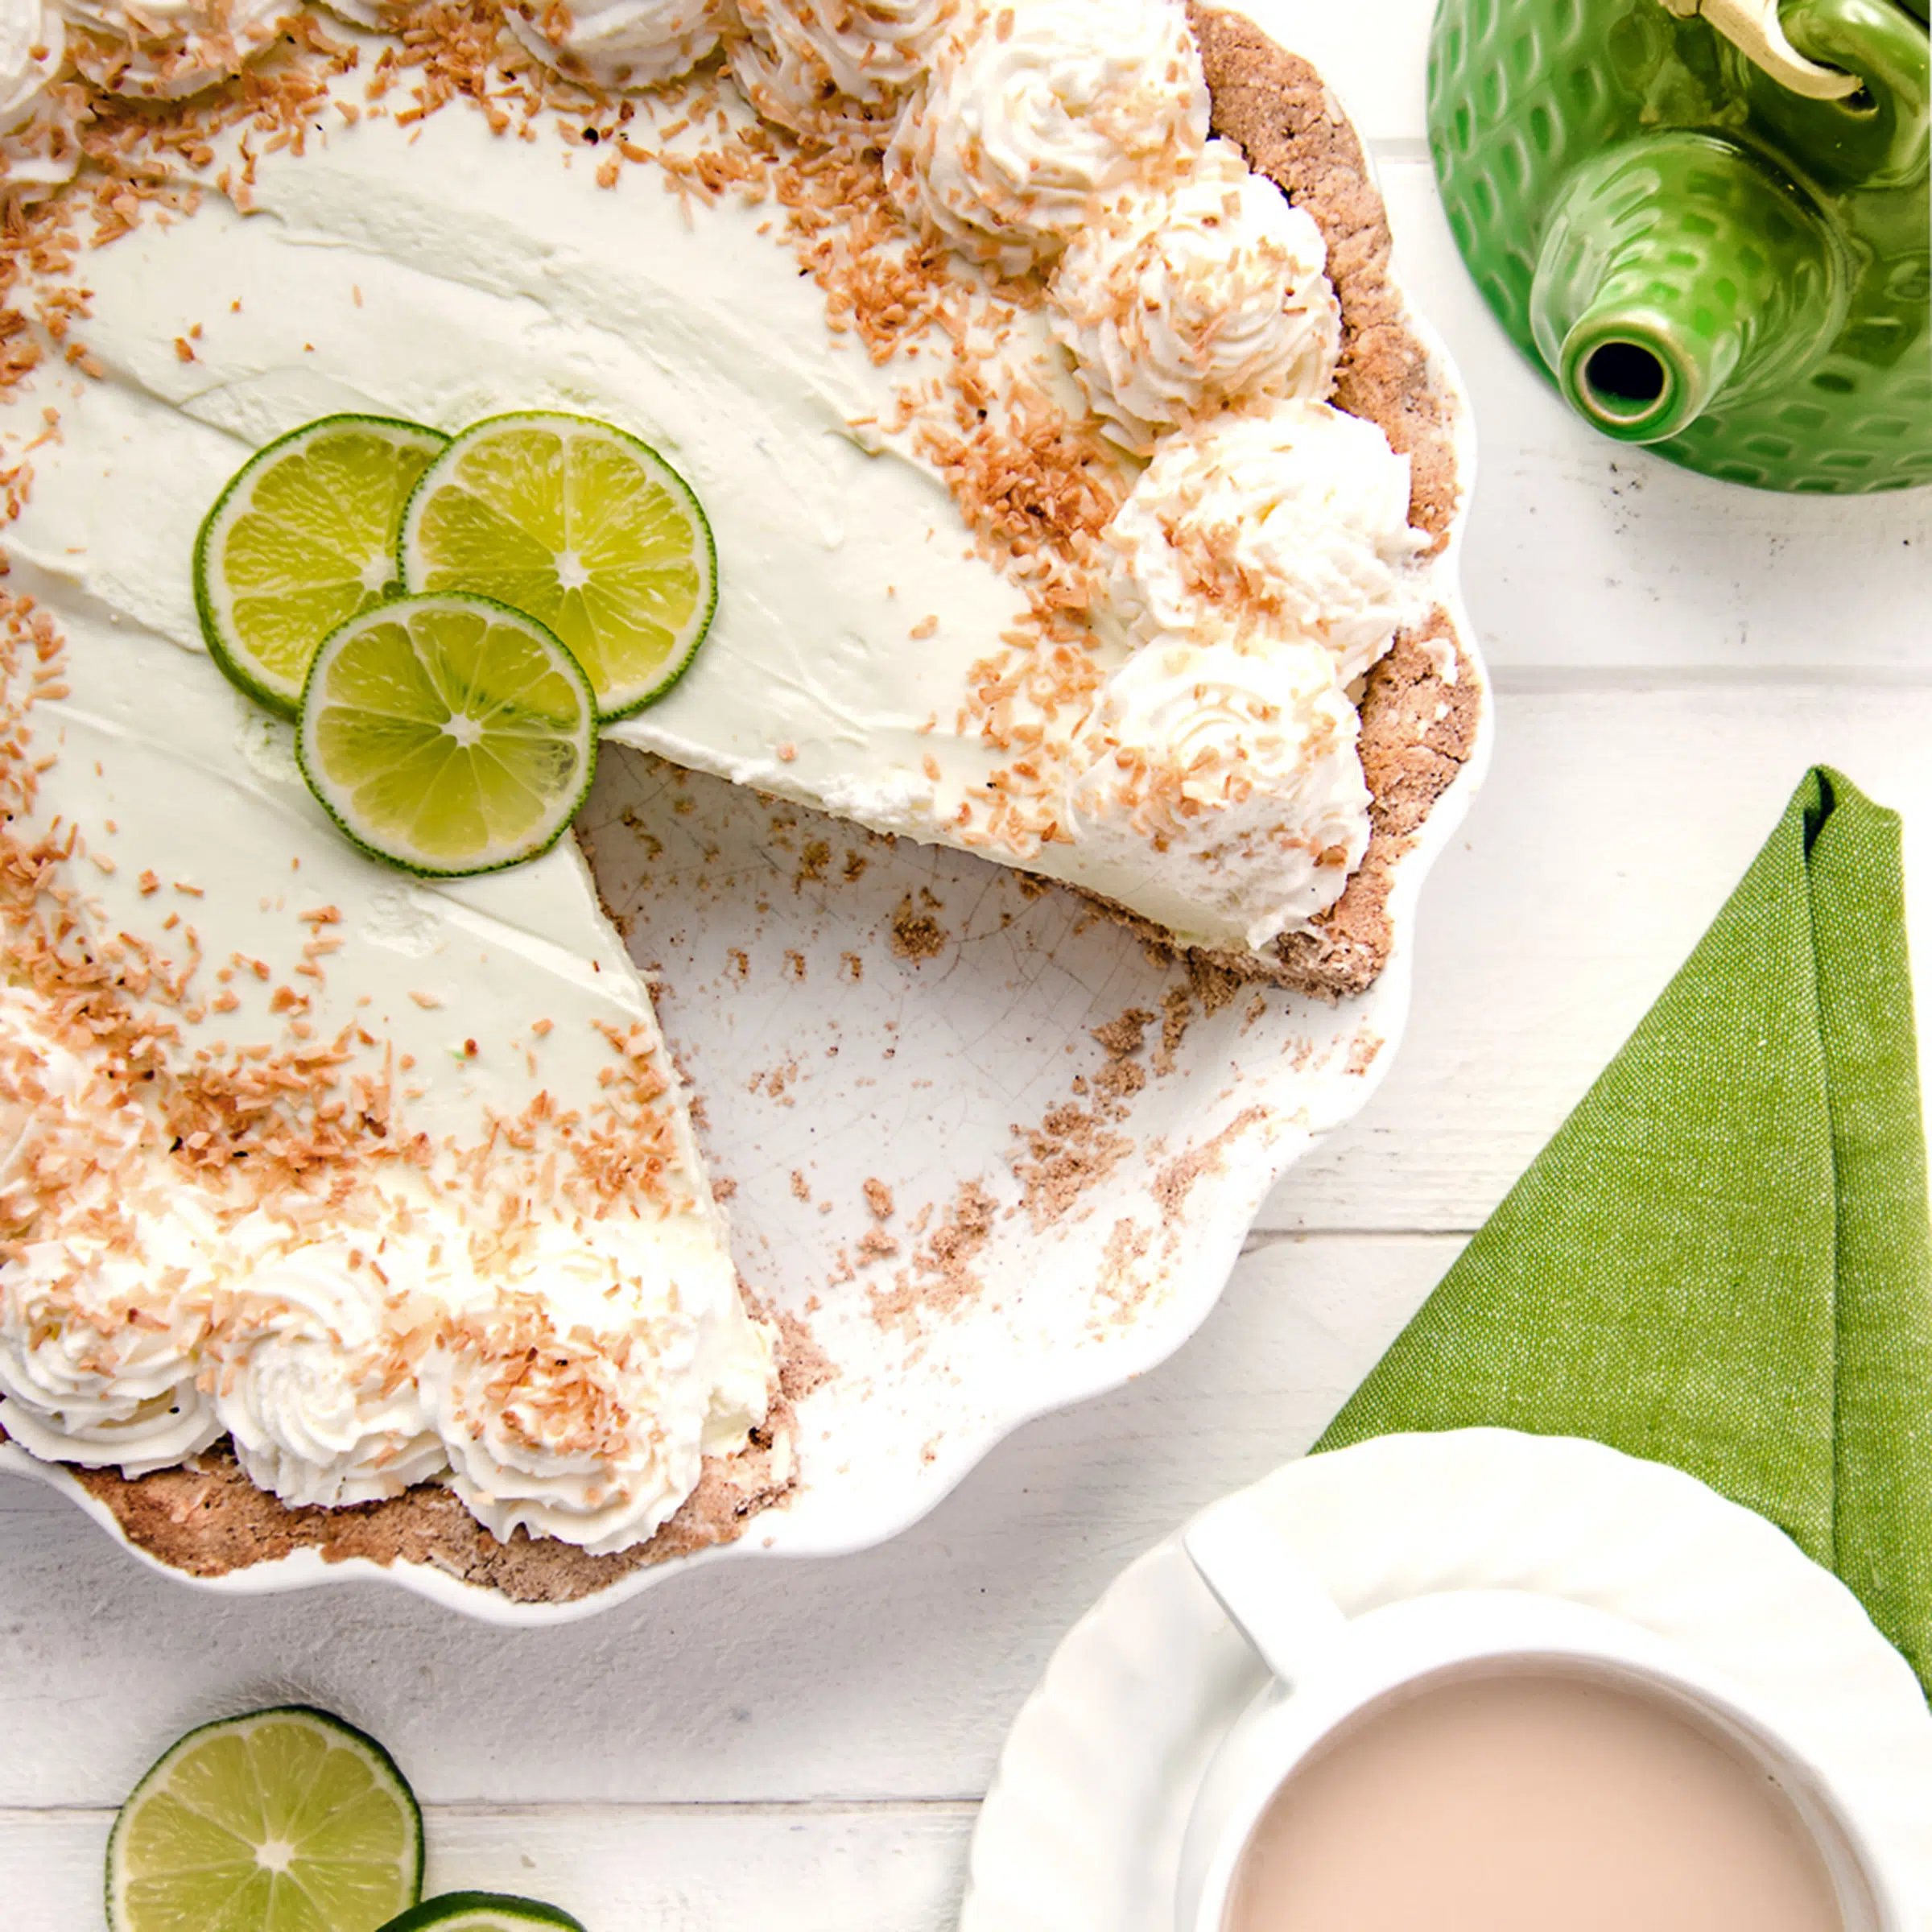 A sugar free key lime pie with a slice taken from it.